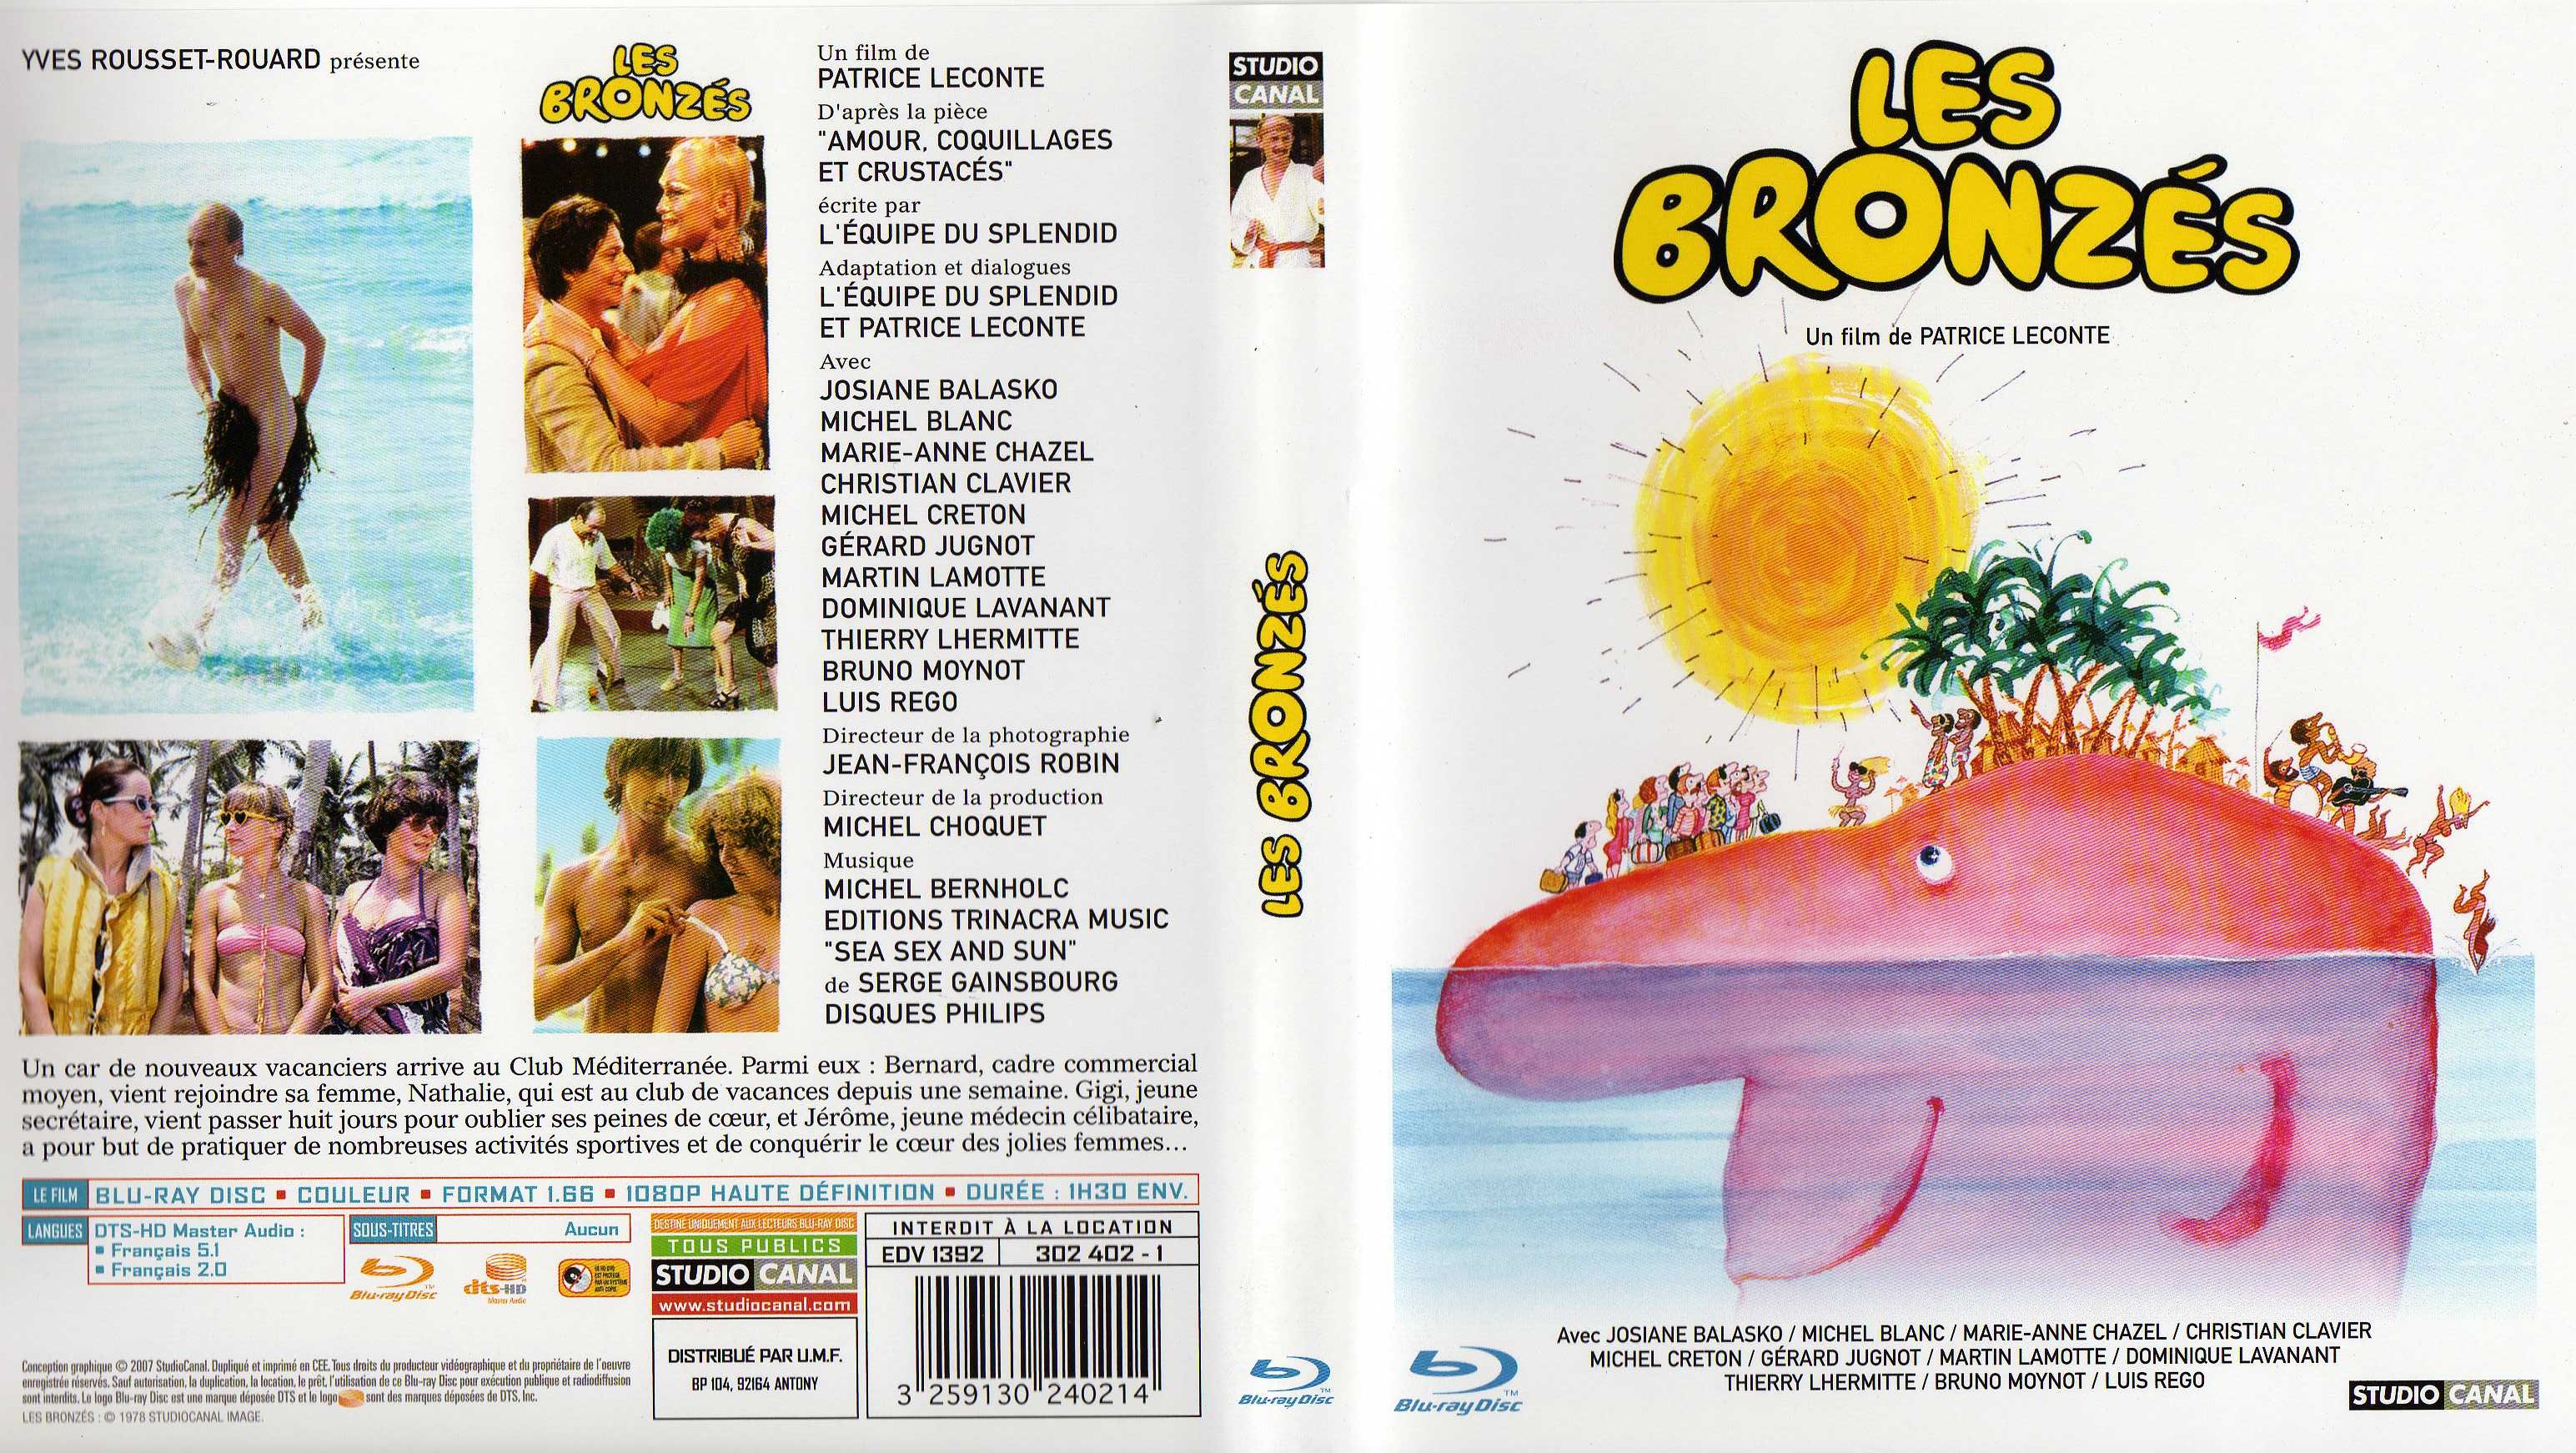 Jaquette DVD Les bronzes (BLU-RAY)